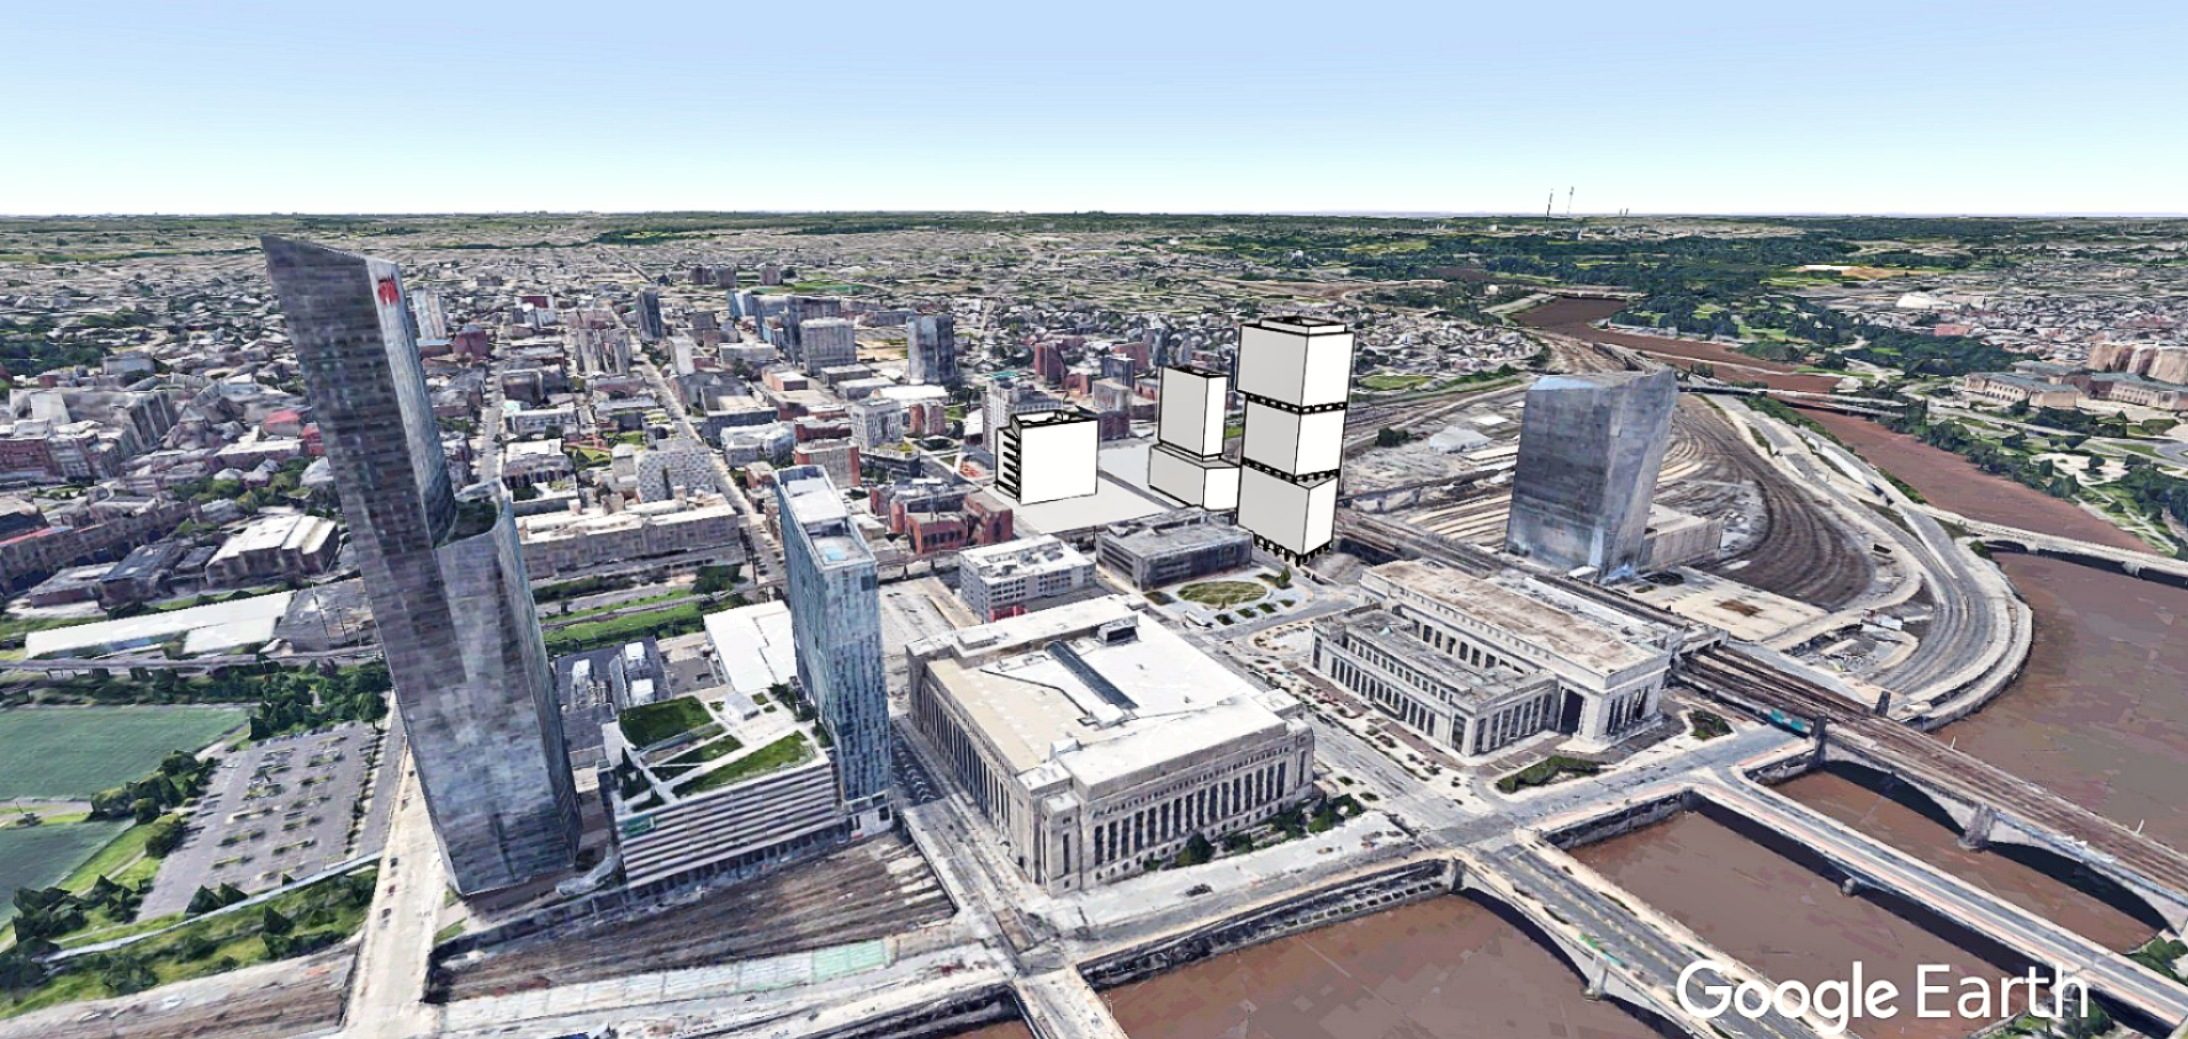 Schuylkill Yards massing aerial looking northwest. Original image by Google Earth, edit and model by Thomas Koloski